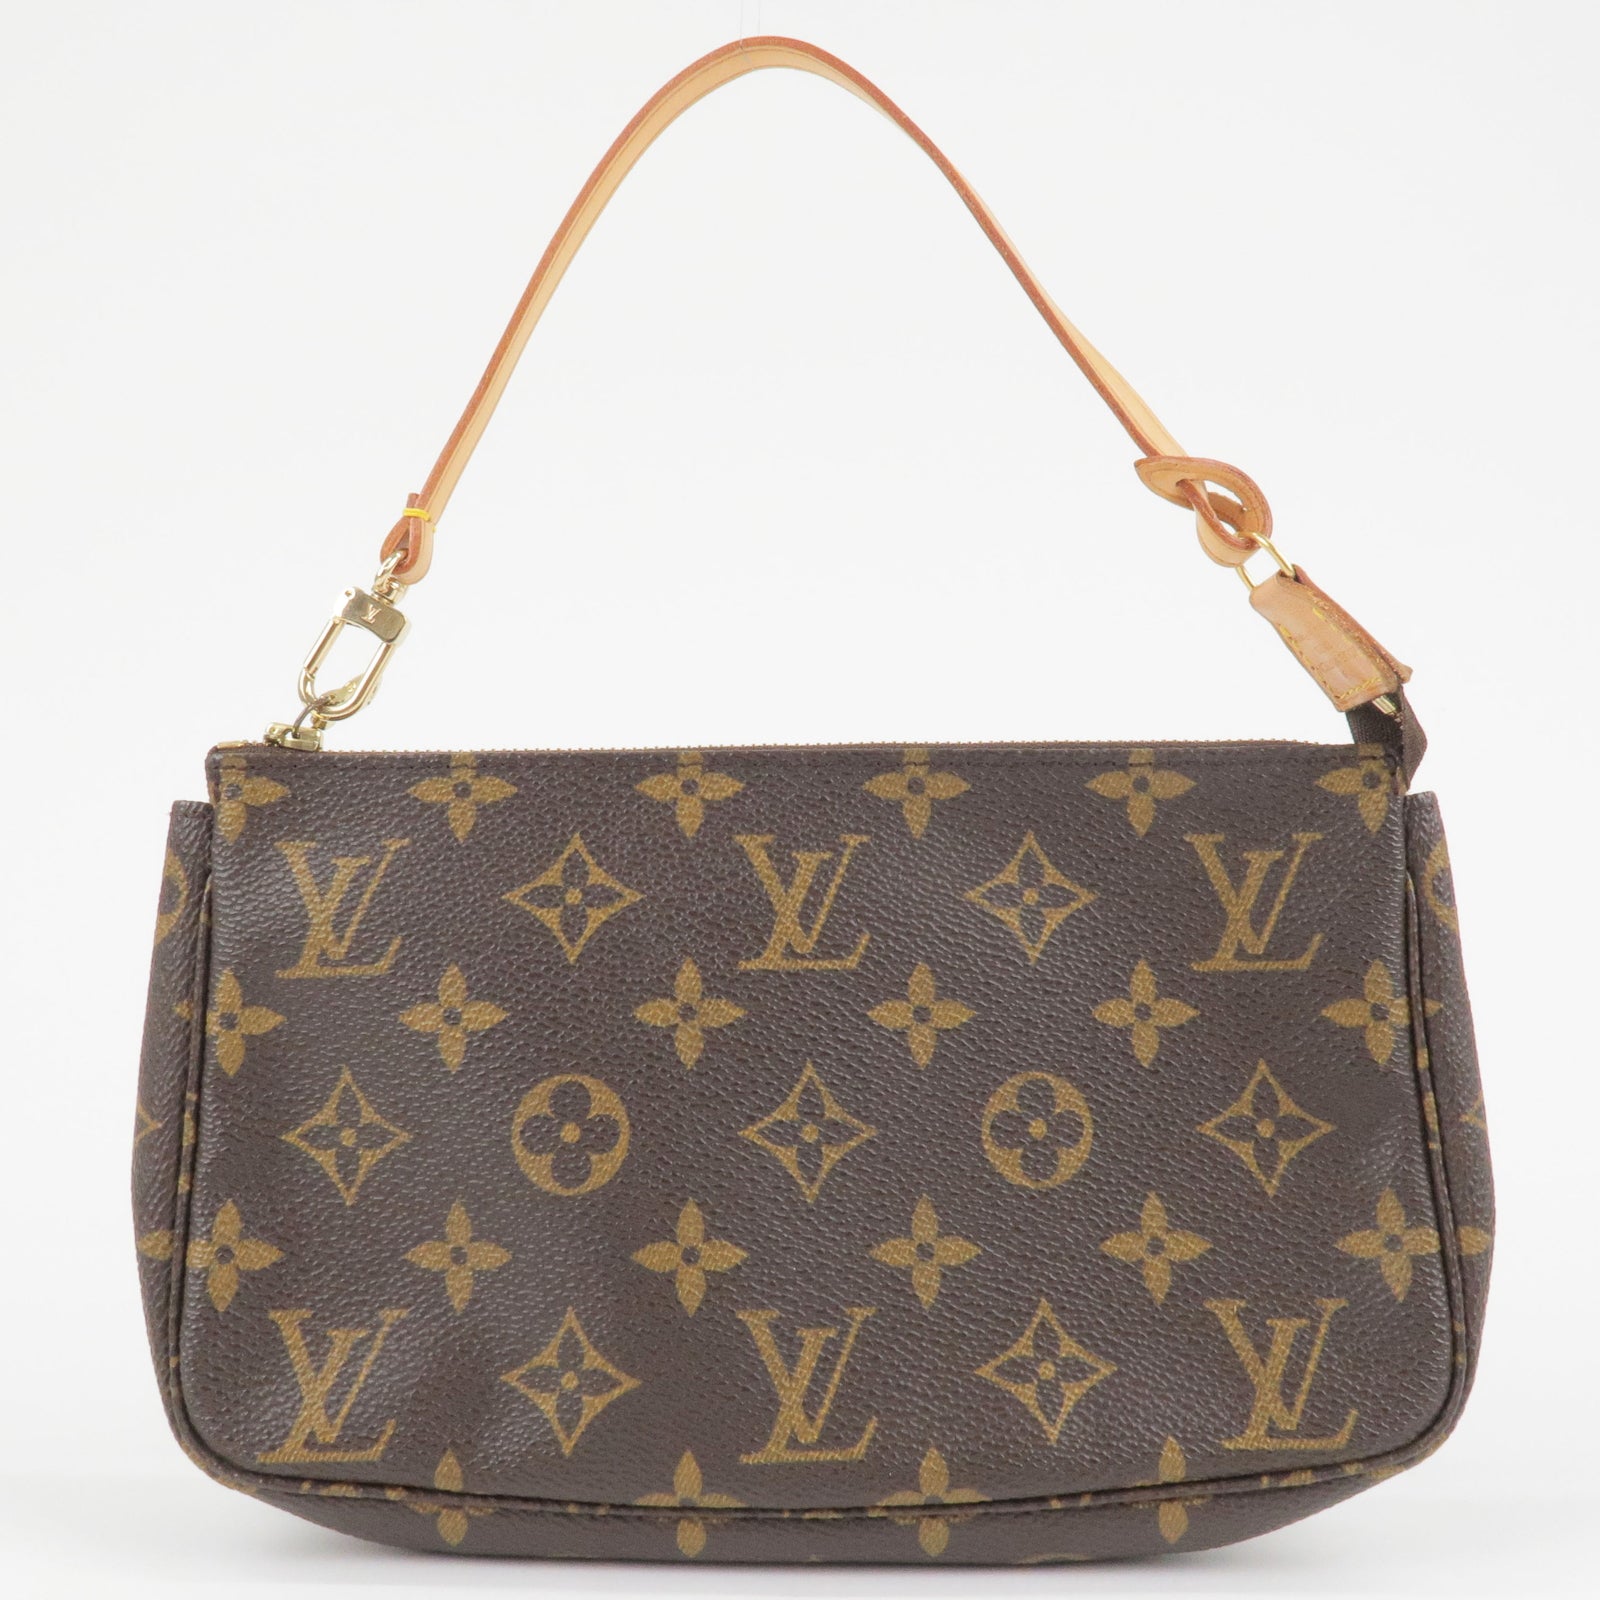 EP. 06] With an old, old Louis Vuitton bag 